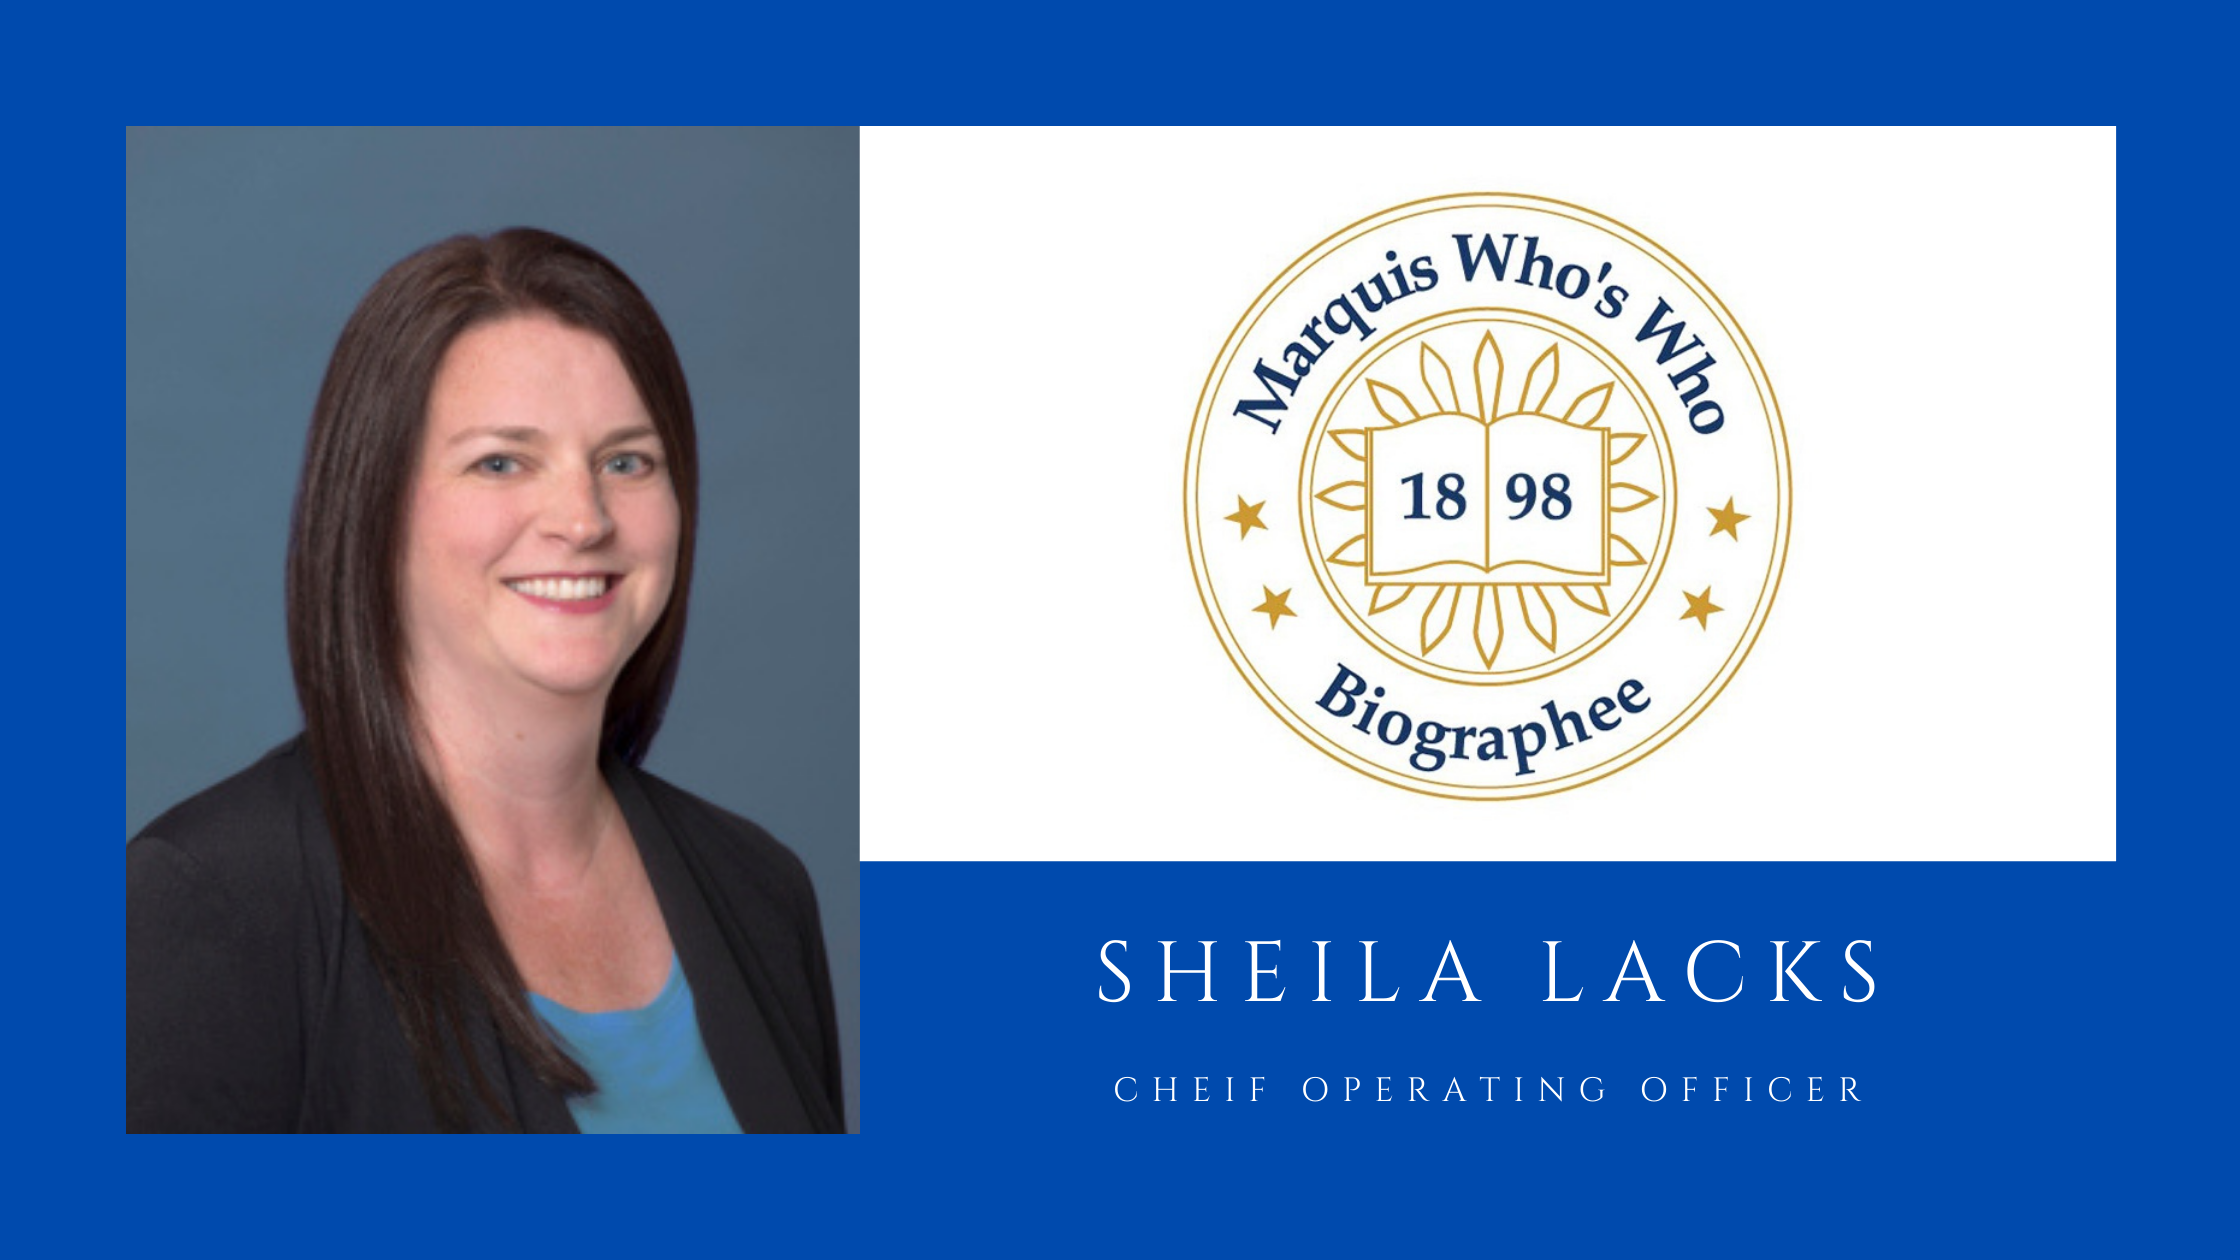 Sheila A. Lacks Celebrated for Dedication to the Field of Accounting and Finance